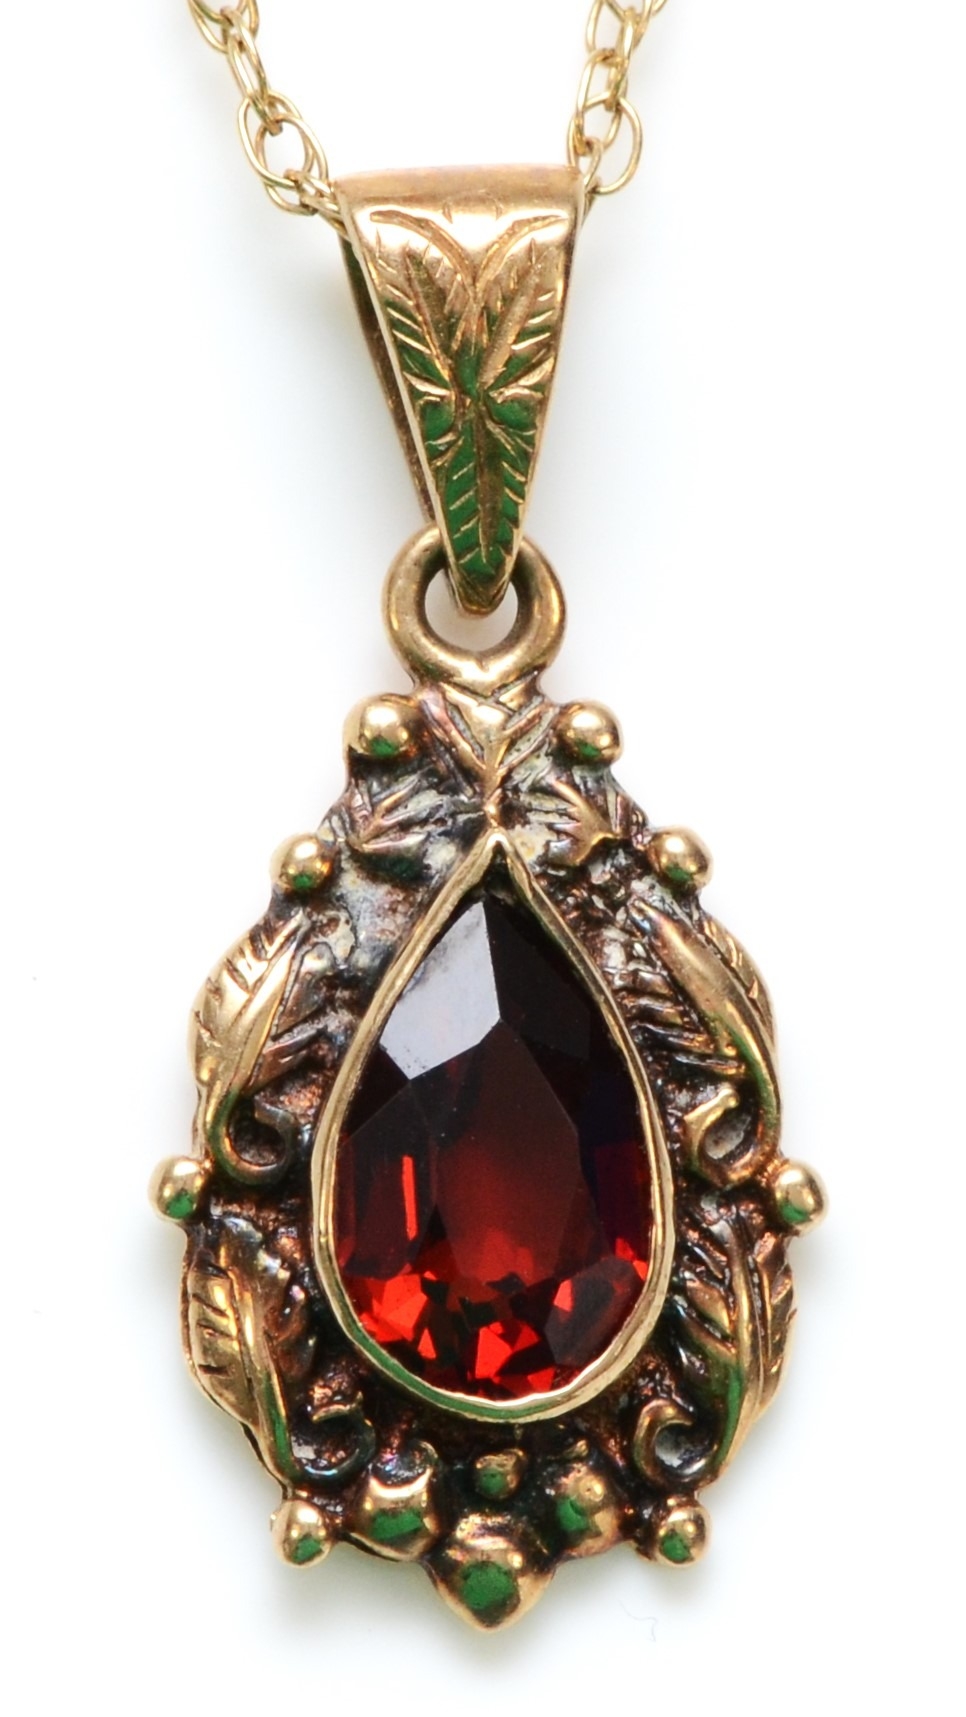 A Victorian style 9ct gold and garnet pear shape pendant 26mm overall, chain, 3gm